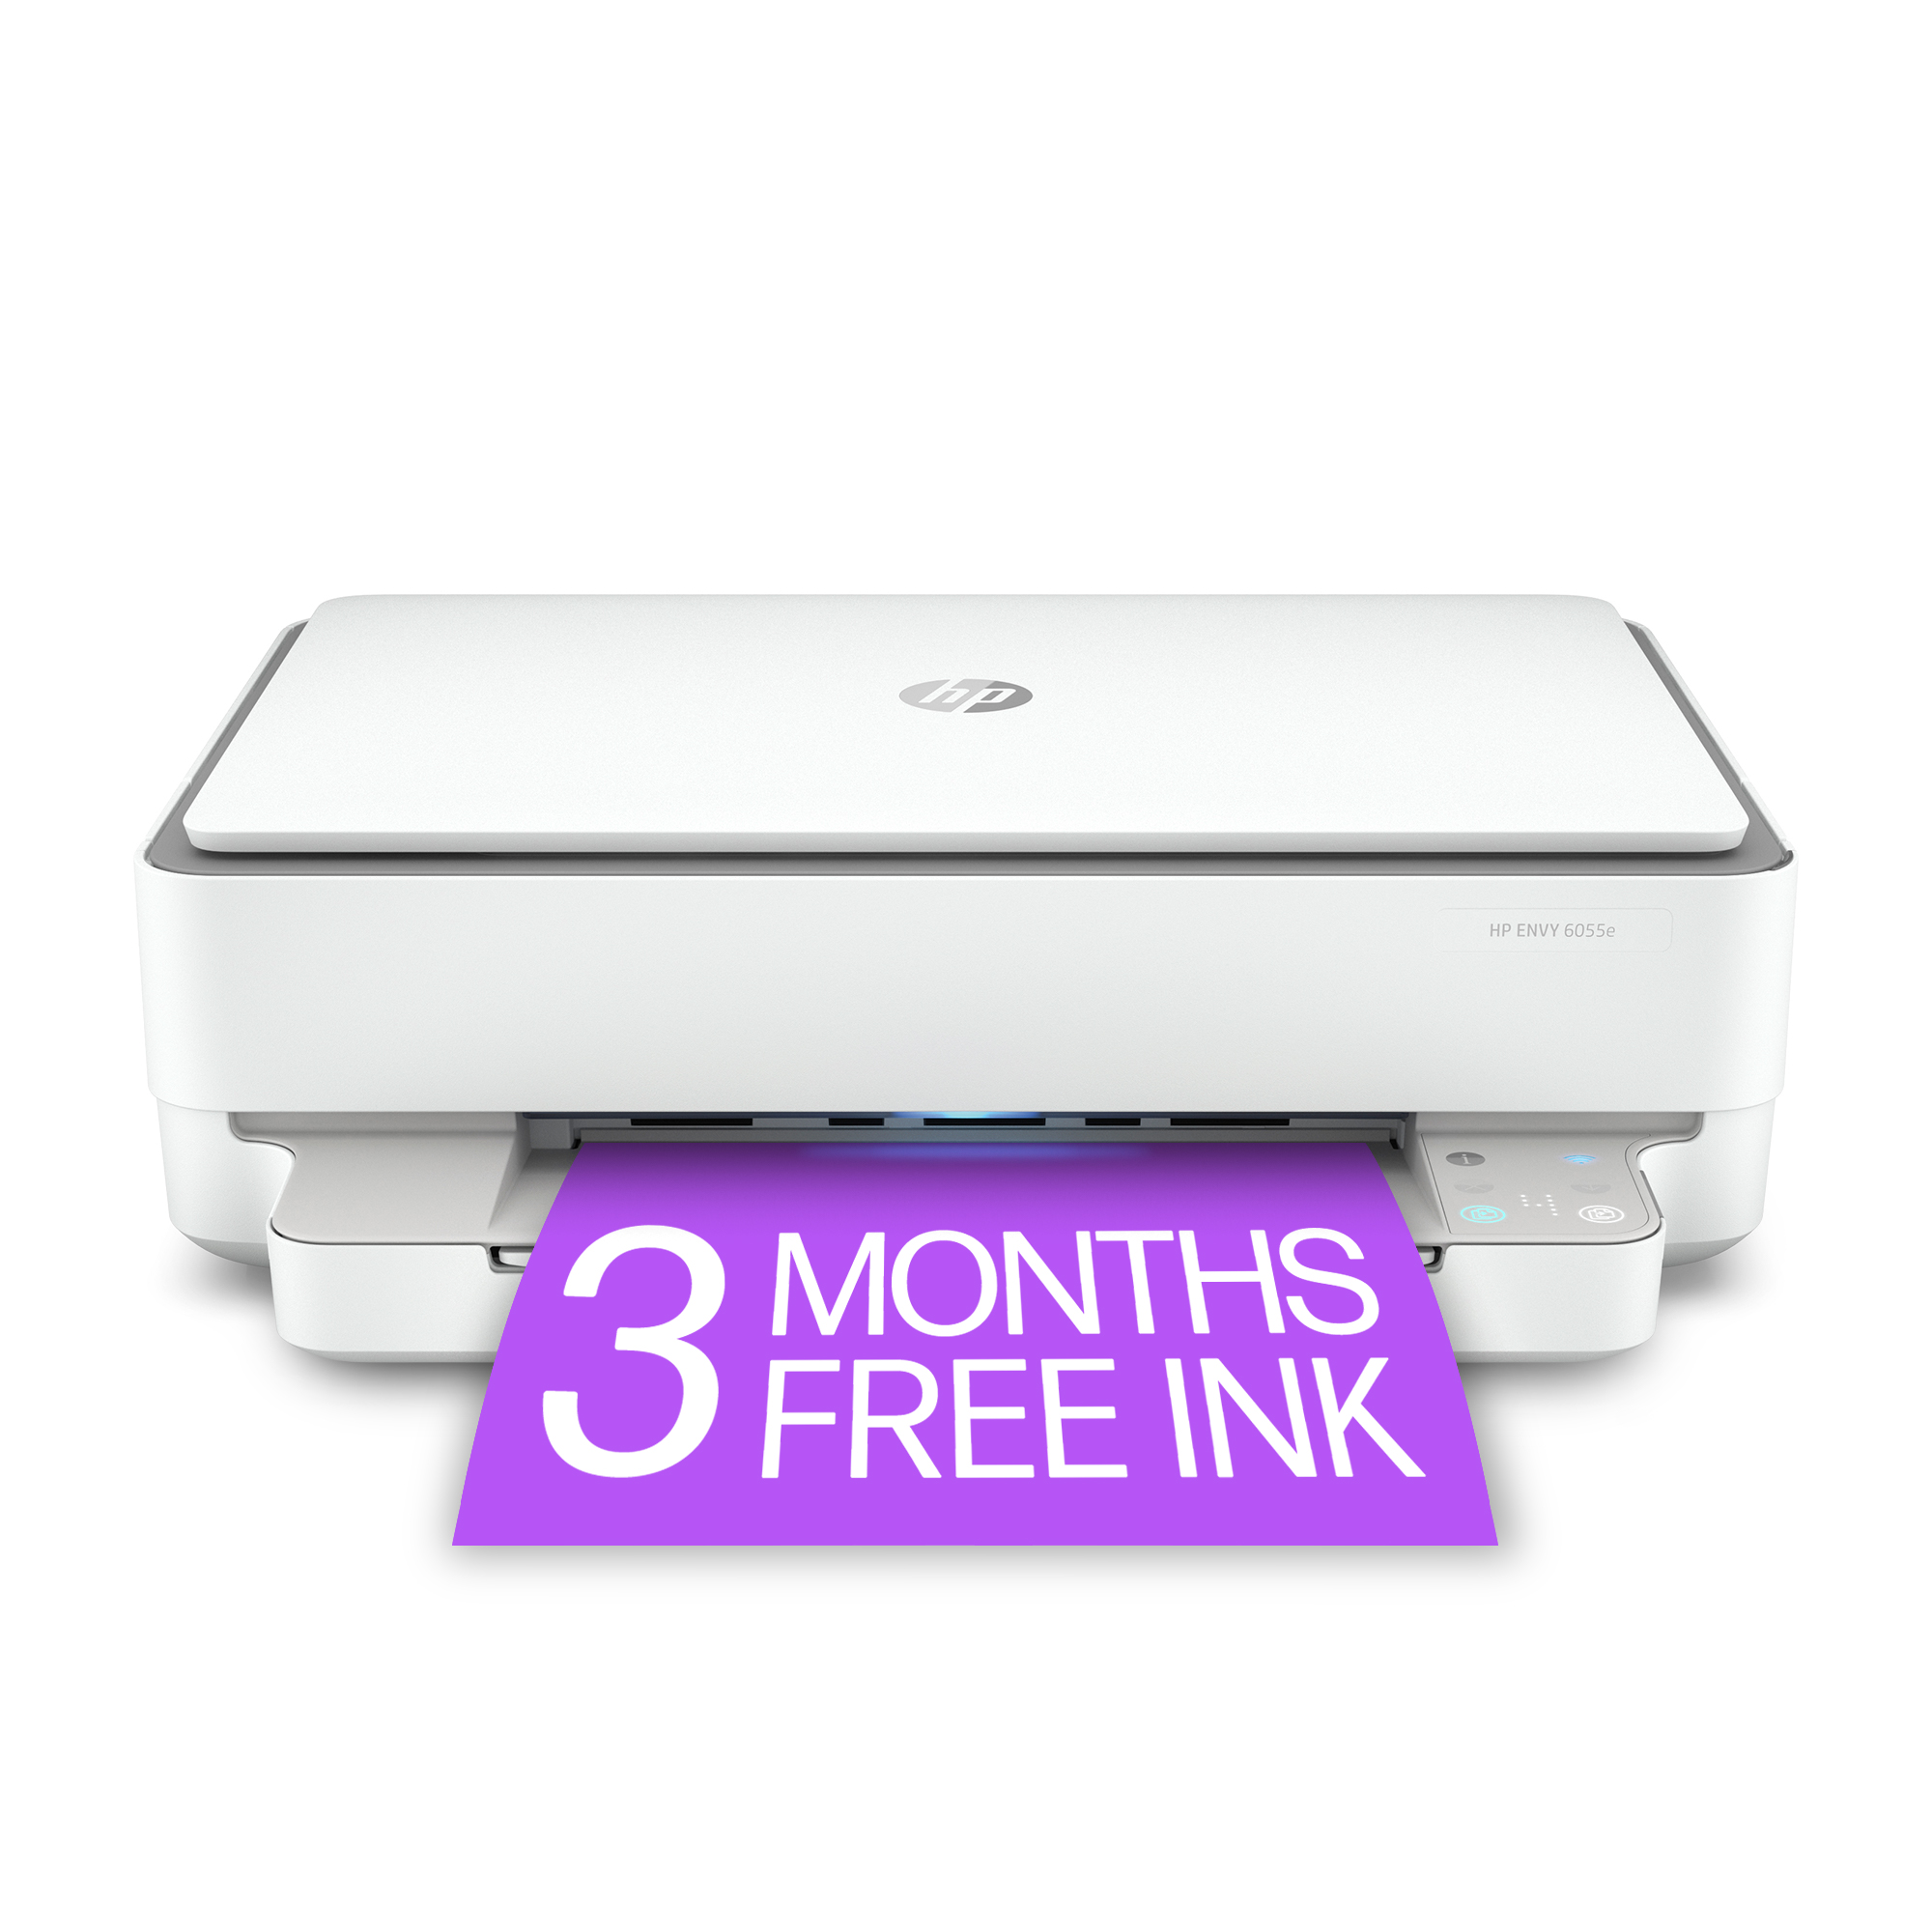 HP ENVY 6055e All-in-One Printer with 3 Months Free Ink Through HP